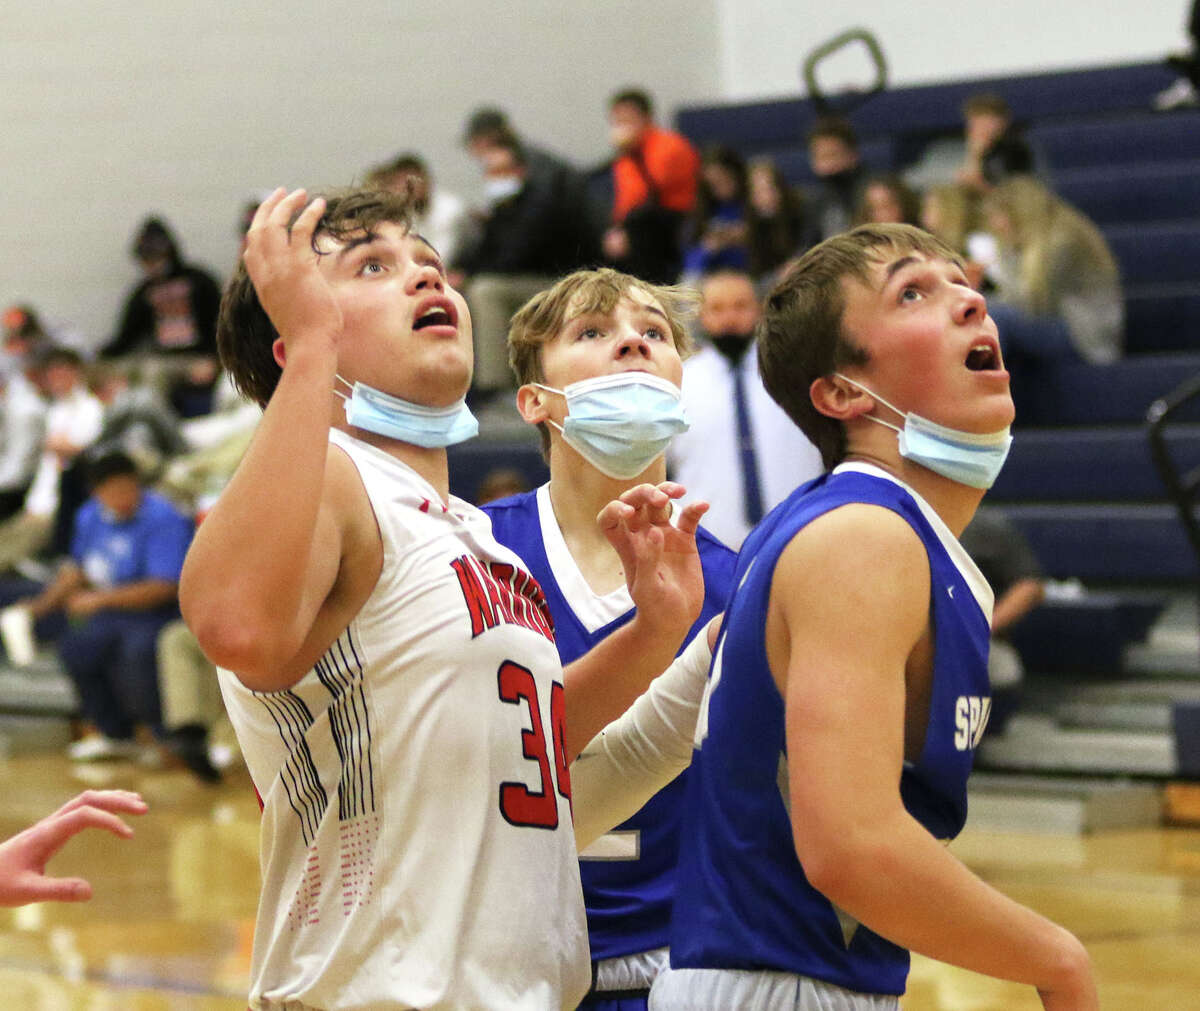 Calhoun's Brody Caselton (left) and North Greene's Garret Hazelwonder (right) watch a shot at the rim during their game Monday at the North Greene Spartans Classic in White Hall. Both Caselton and Hazelwonder made the all-tournament team announced Friday night at North Greene.